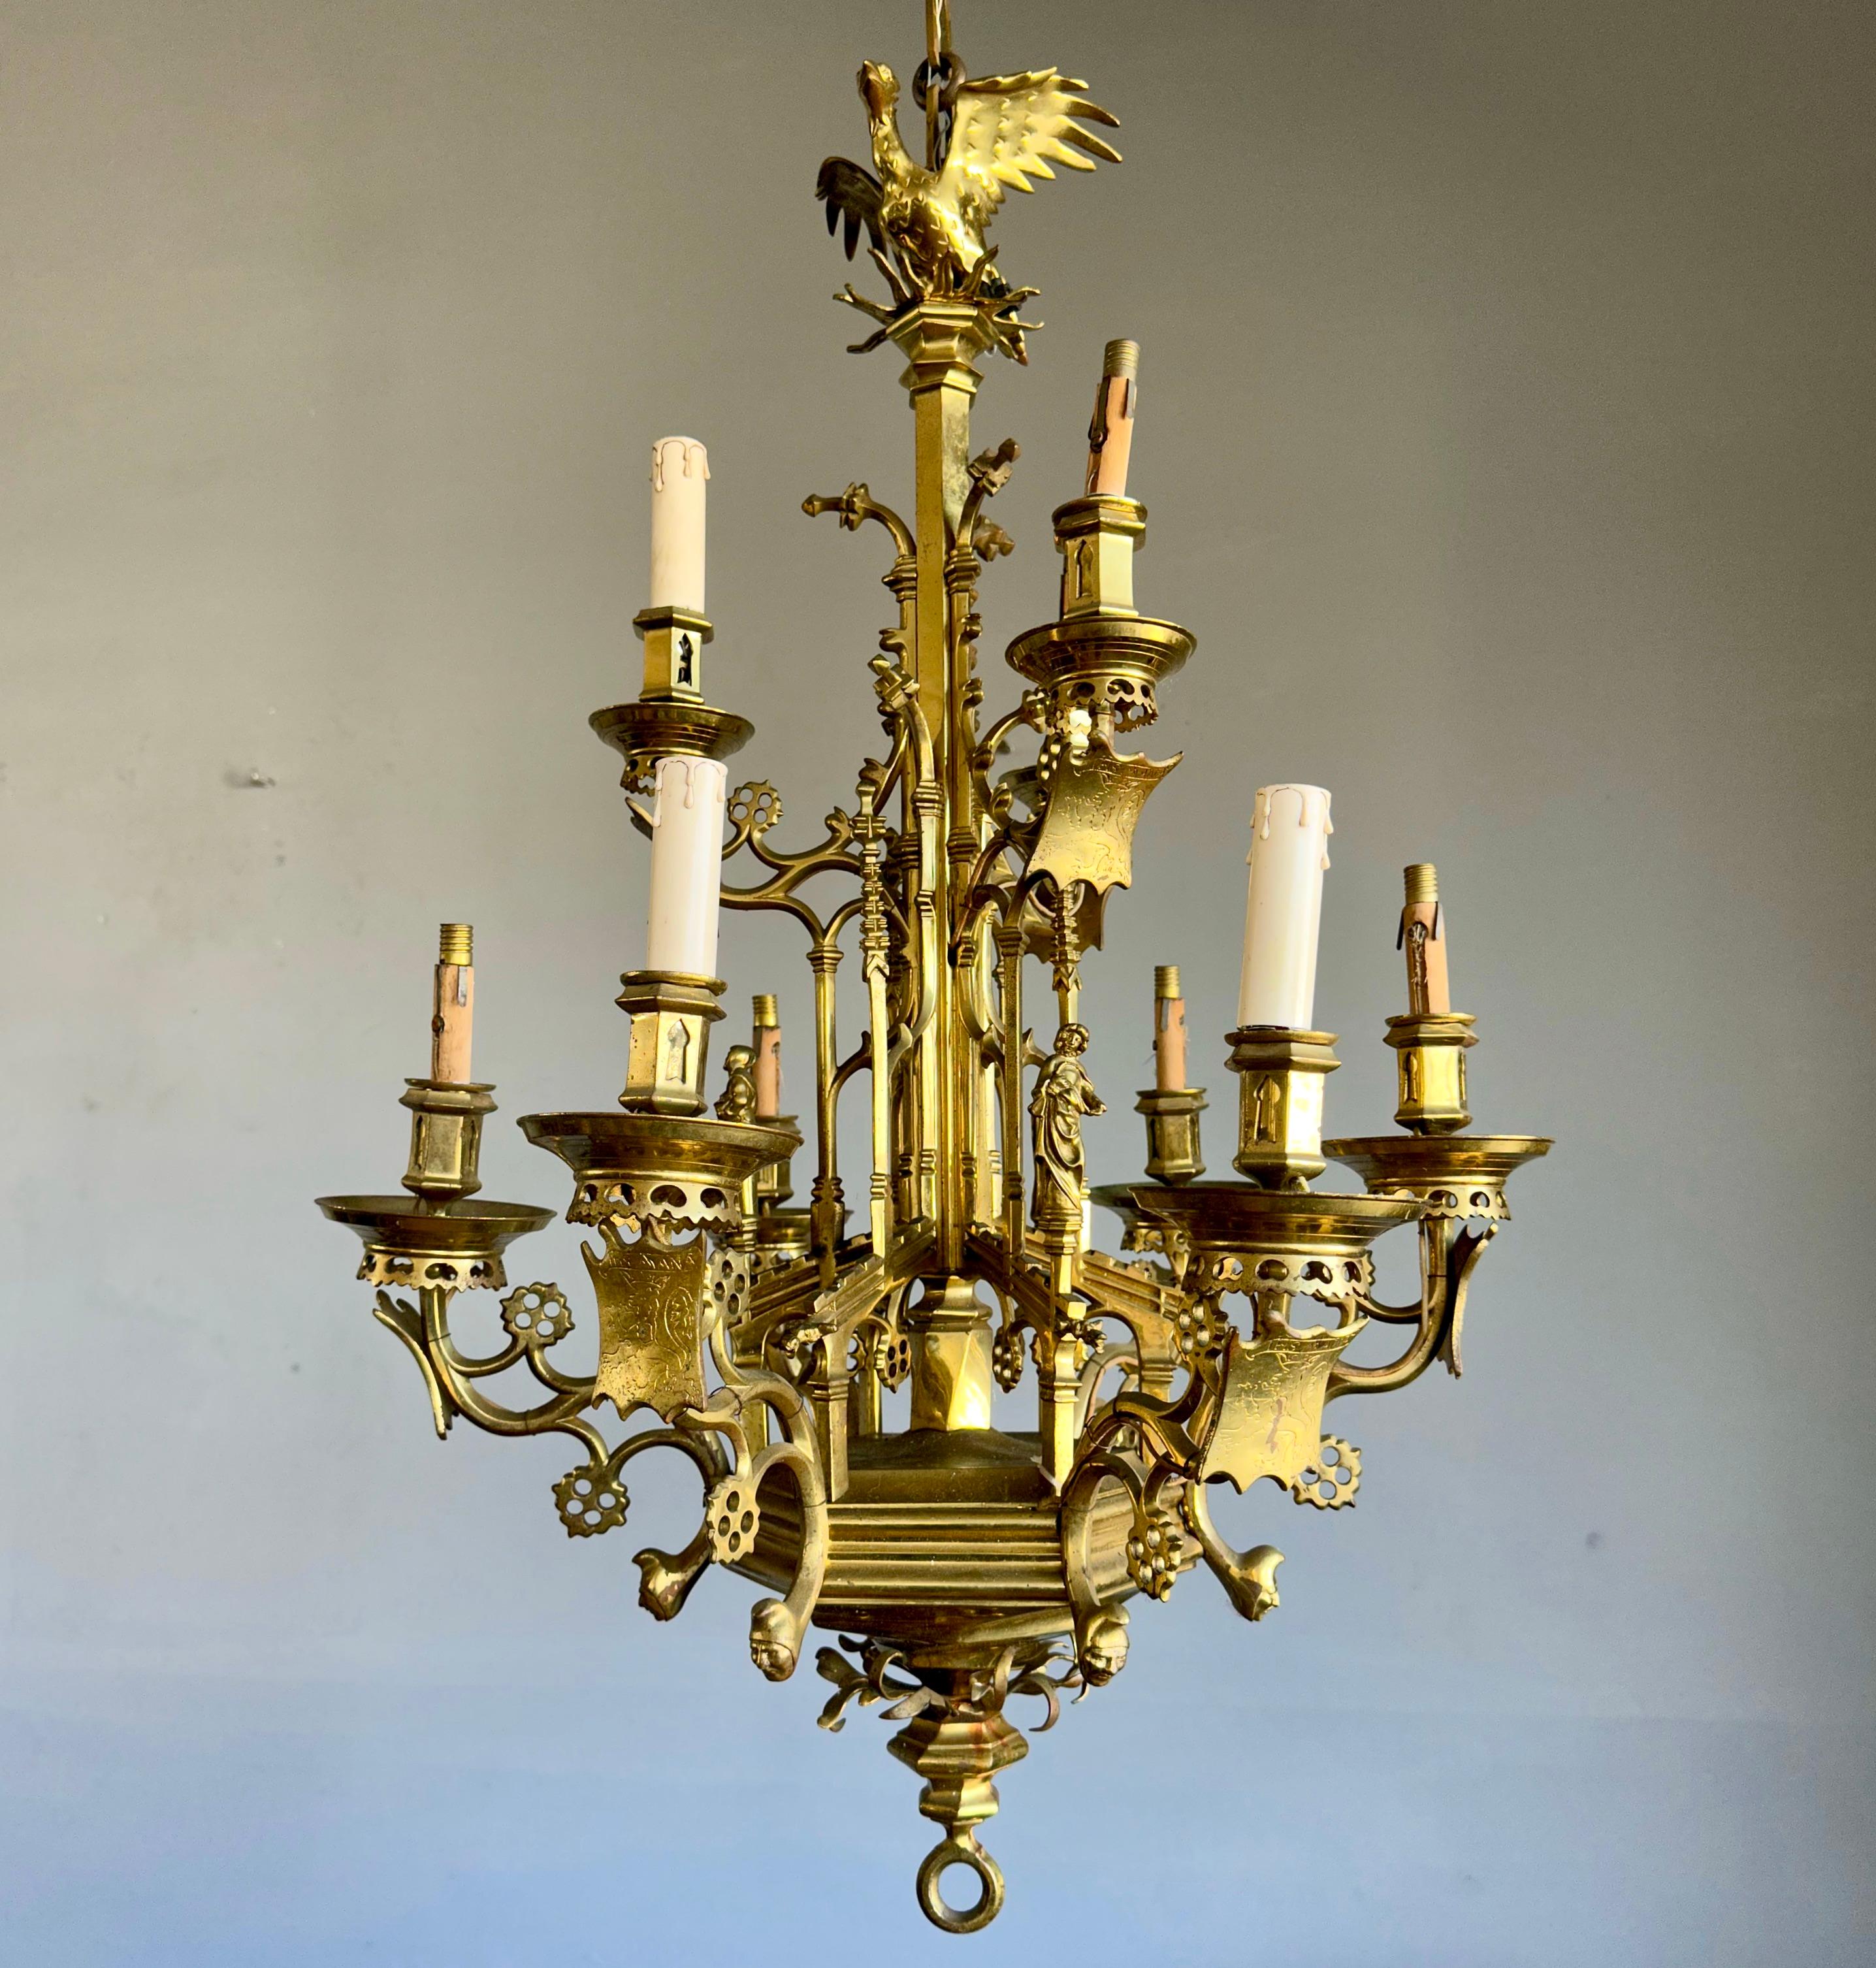 Handcrafted and truly impressive Neo-Gothic fixture that can also be used for candles.

Over the decades we have sold a number of very good antique bronze, Gothic light fixtures for both candles and electrical bulbs. However, we never offered one as